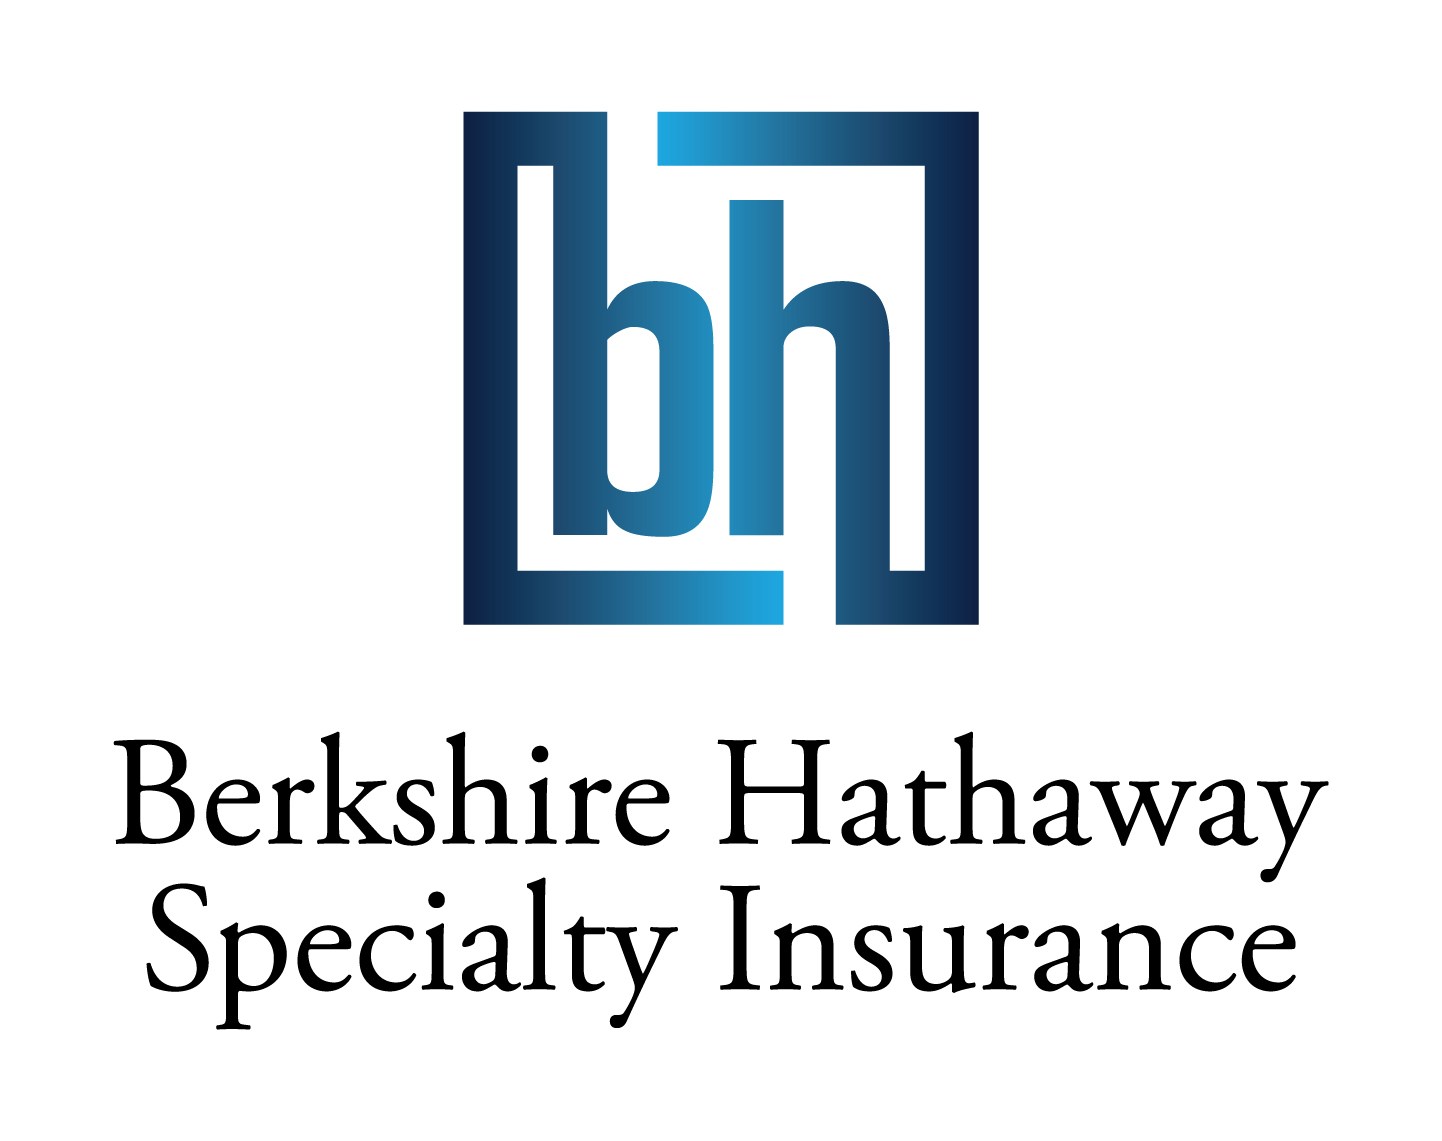 Berkshire Hathaway Specialty Insurance Launches Defense Base Act Coverage Globally via Dedicated Team in Dubai